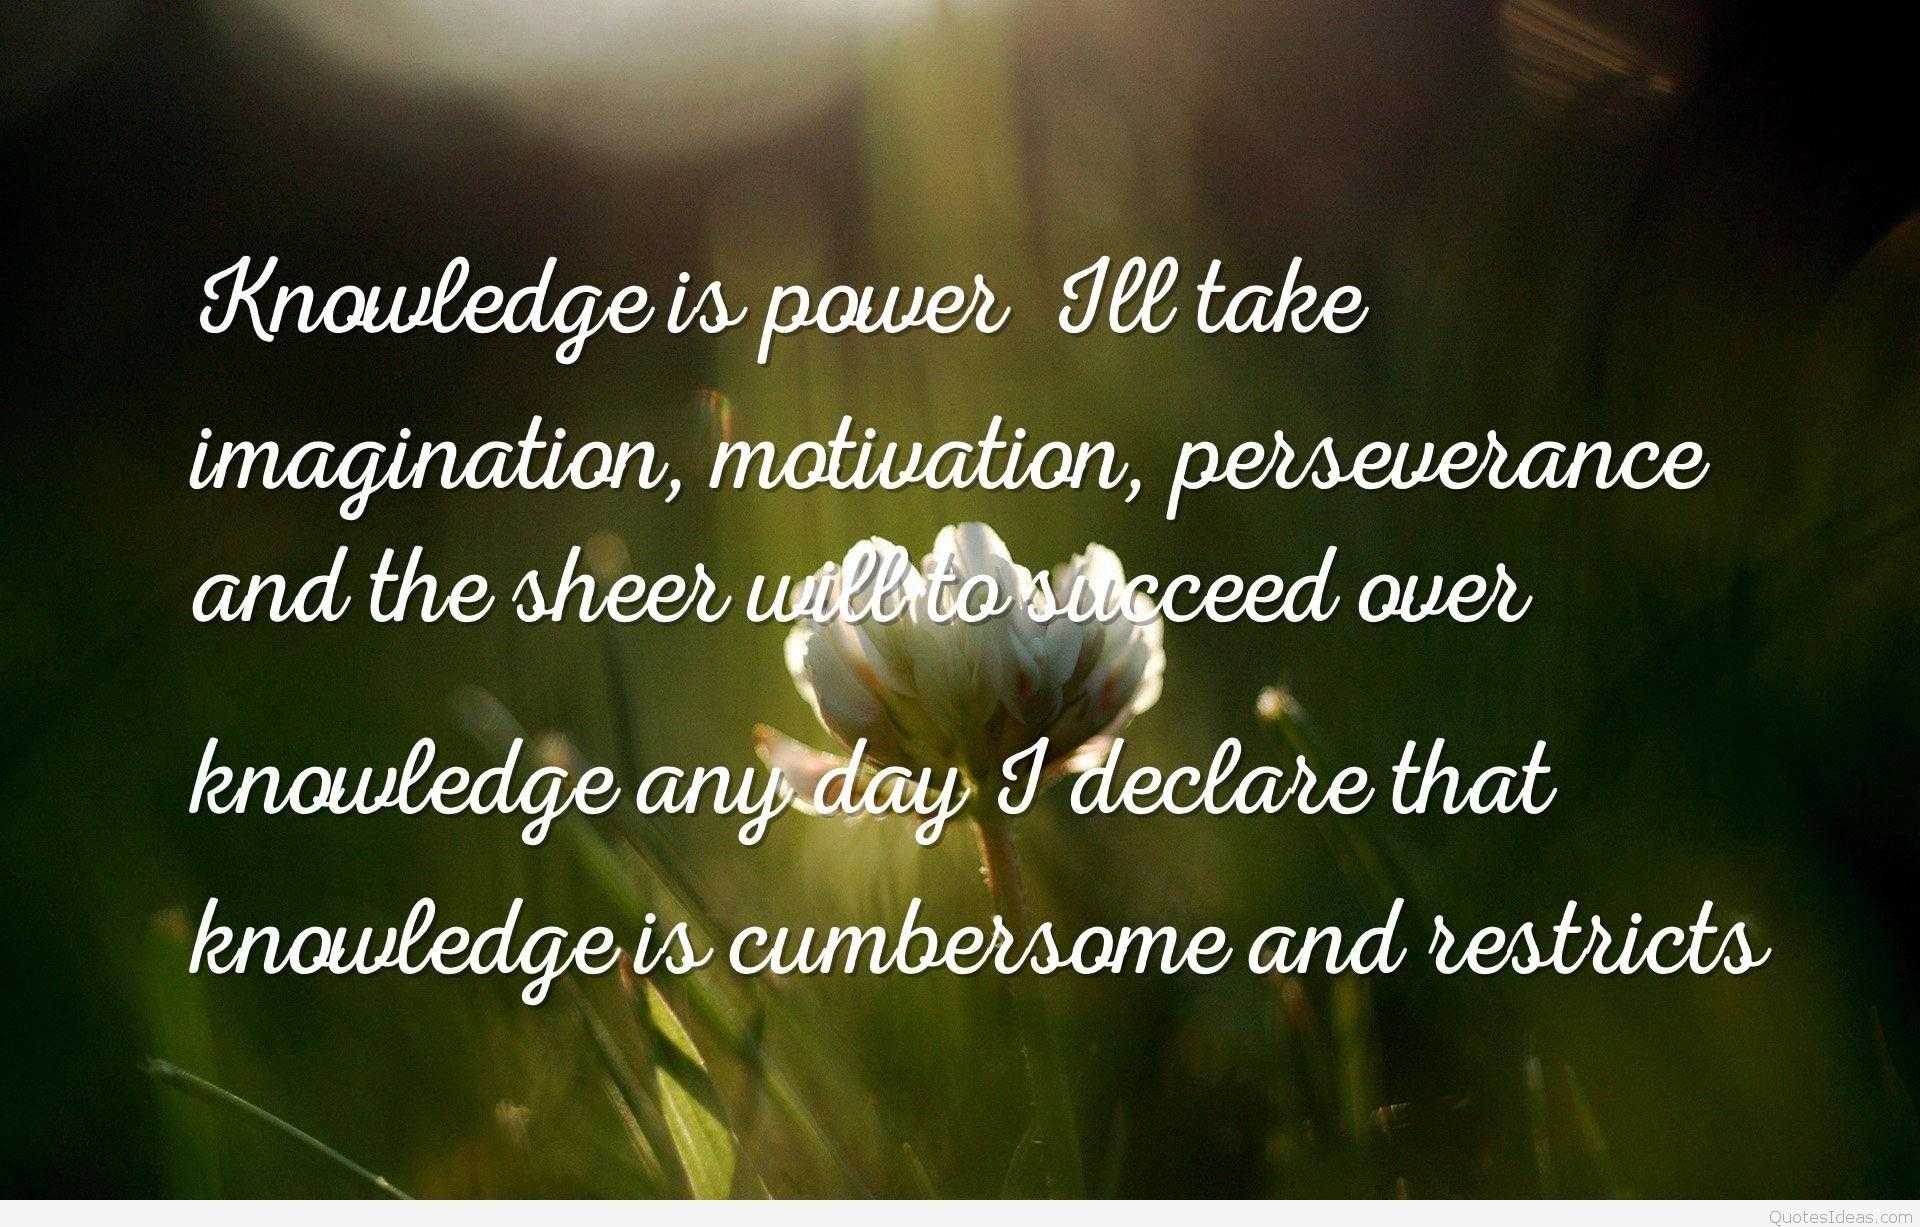 Amazing knowledge wallpaper HD quote